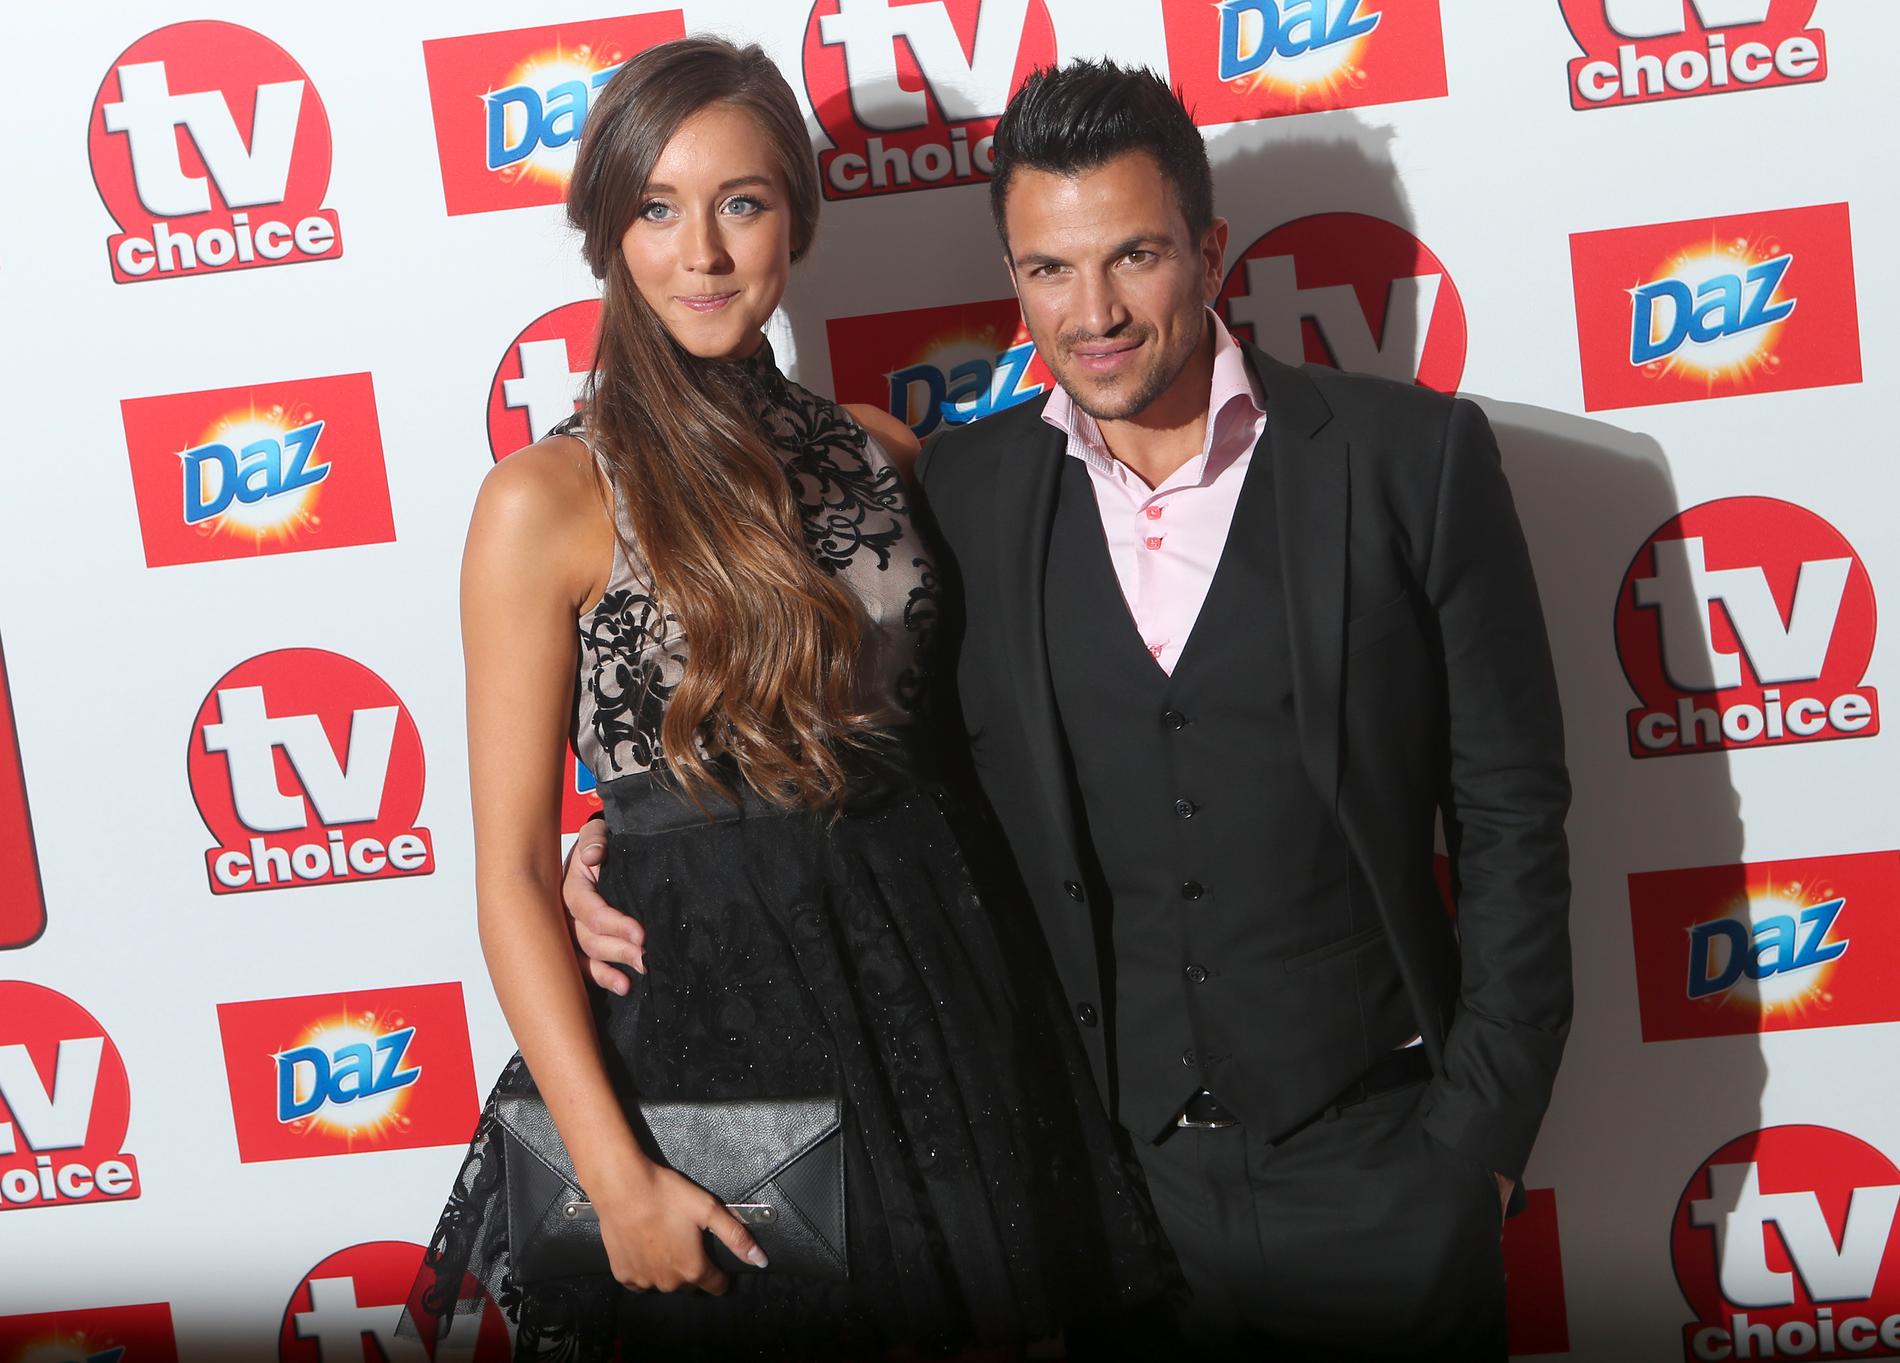 Emily Andre and Peter Andre